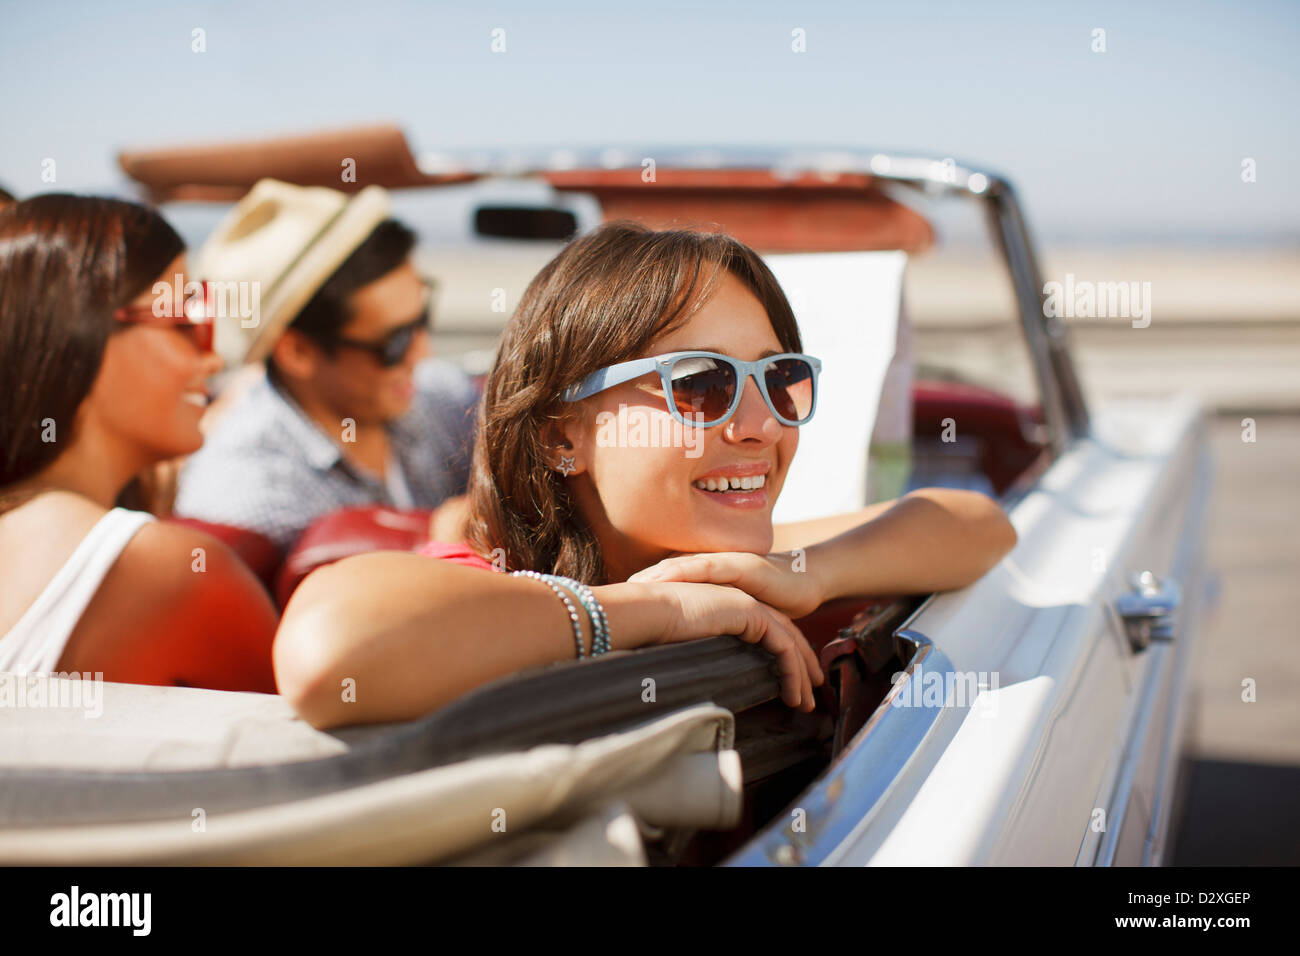 Smiling woman leaning out convertible Banque D'Images